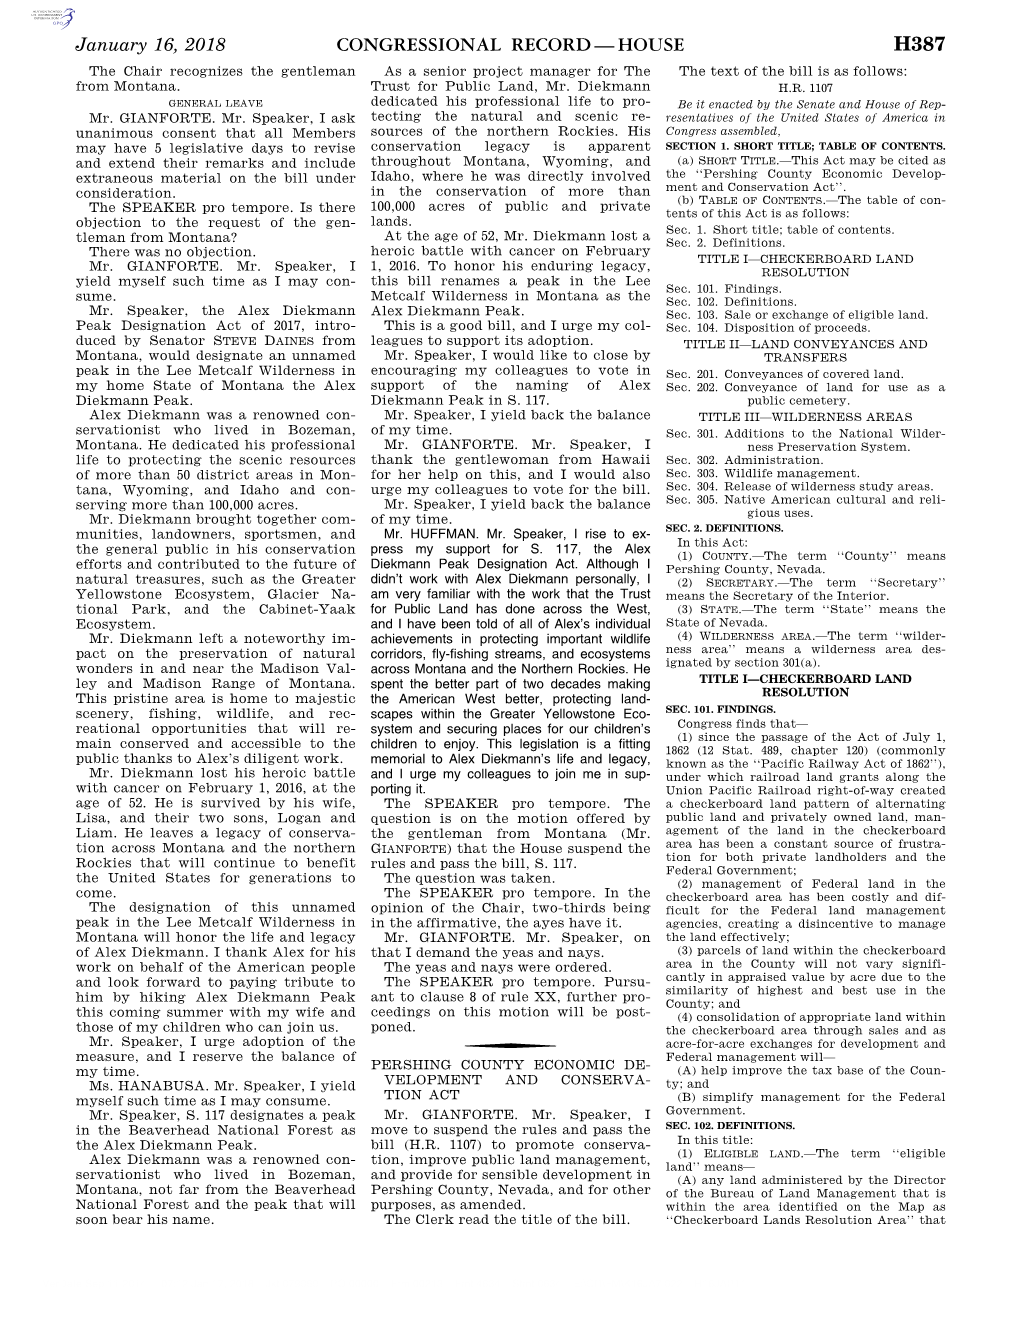 Congressional Record—House H387